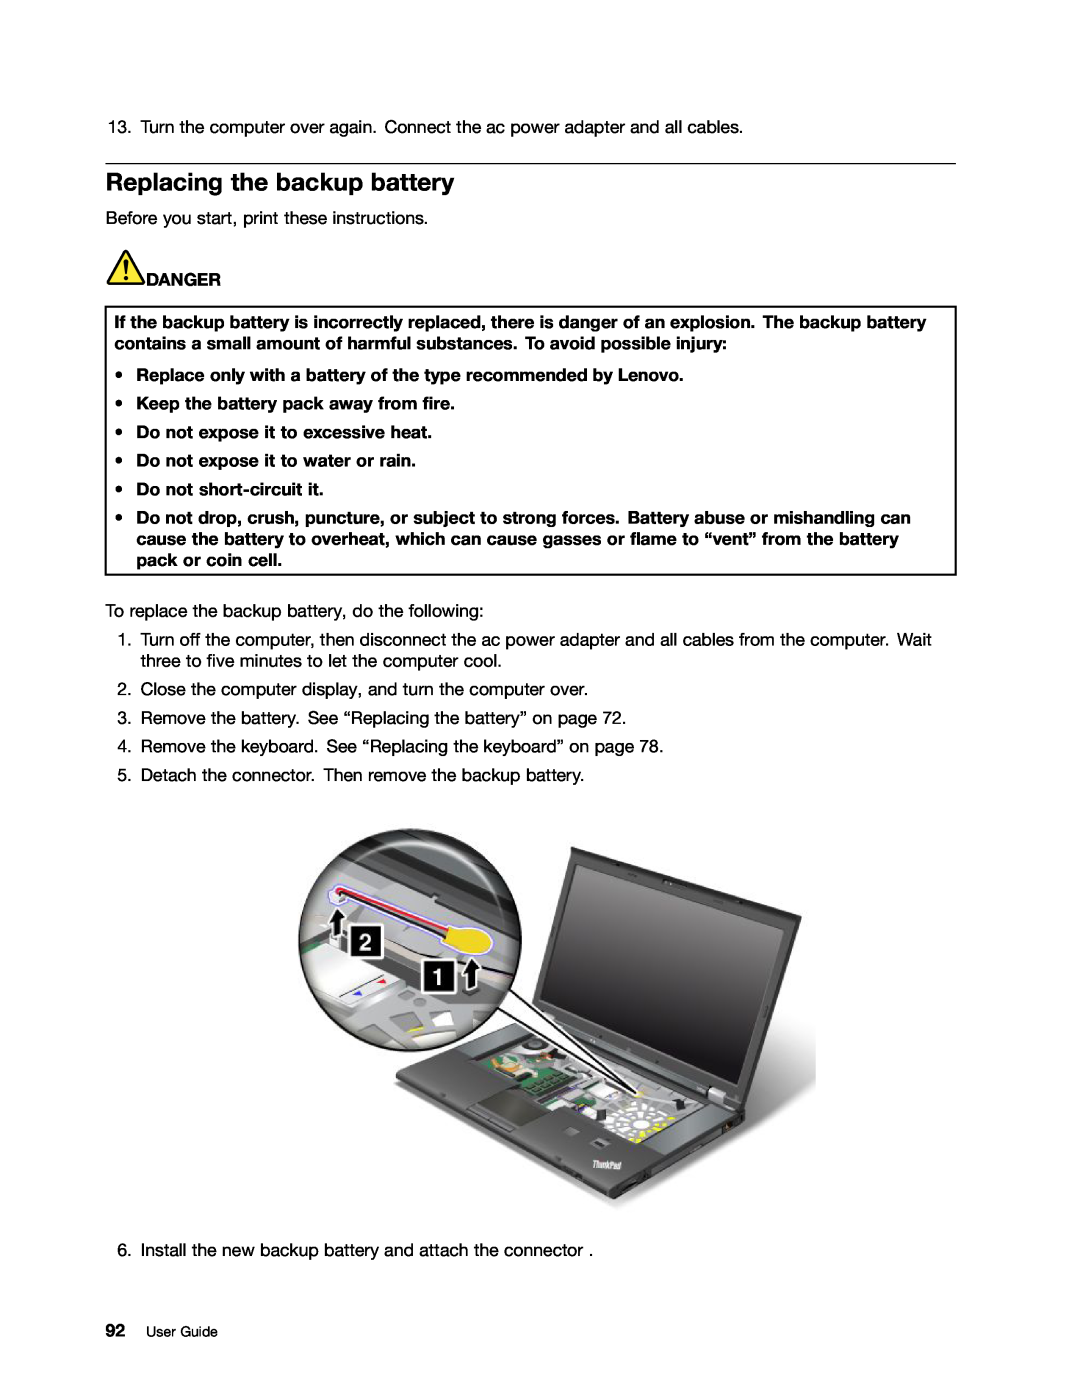 Lenovo 24384KU, W530 Replacing the backup battery, Danger, Replace only with a battery of the type recommended by Lenovo 